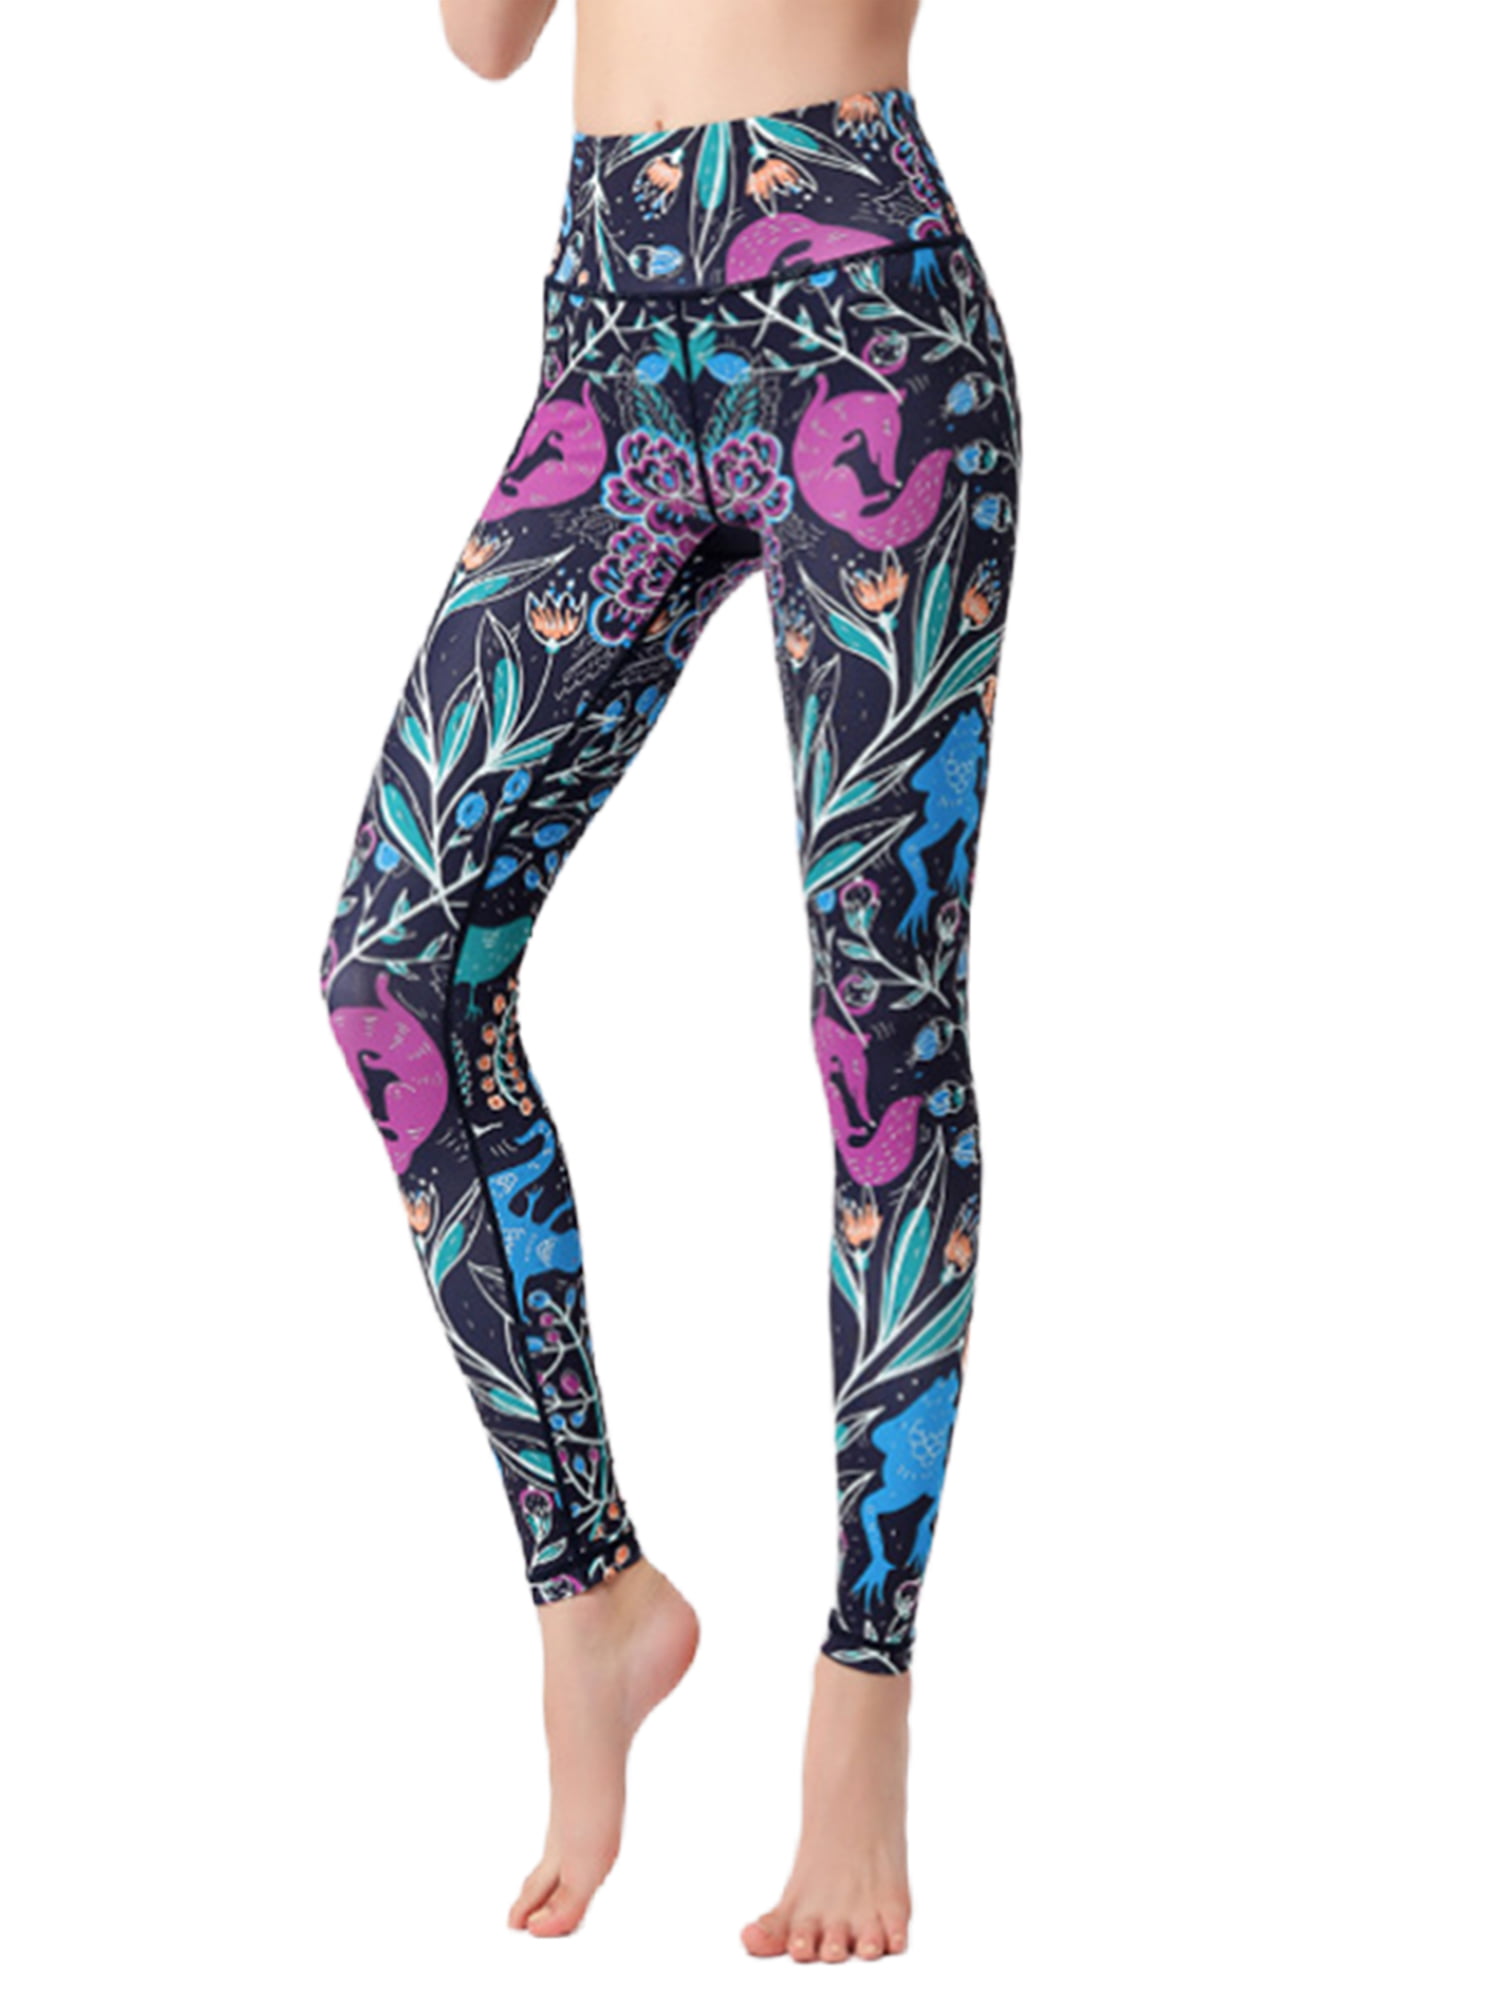 Womens Yoga Pants Floral Printed High Waisted Sports Fitness Workout Leggings 